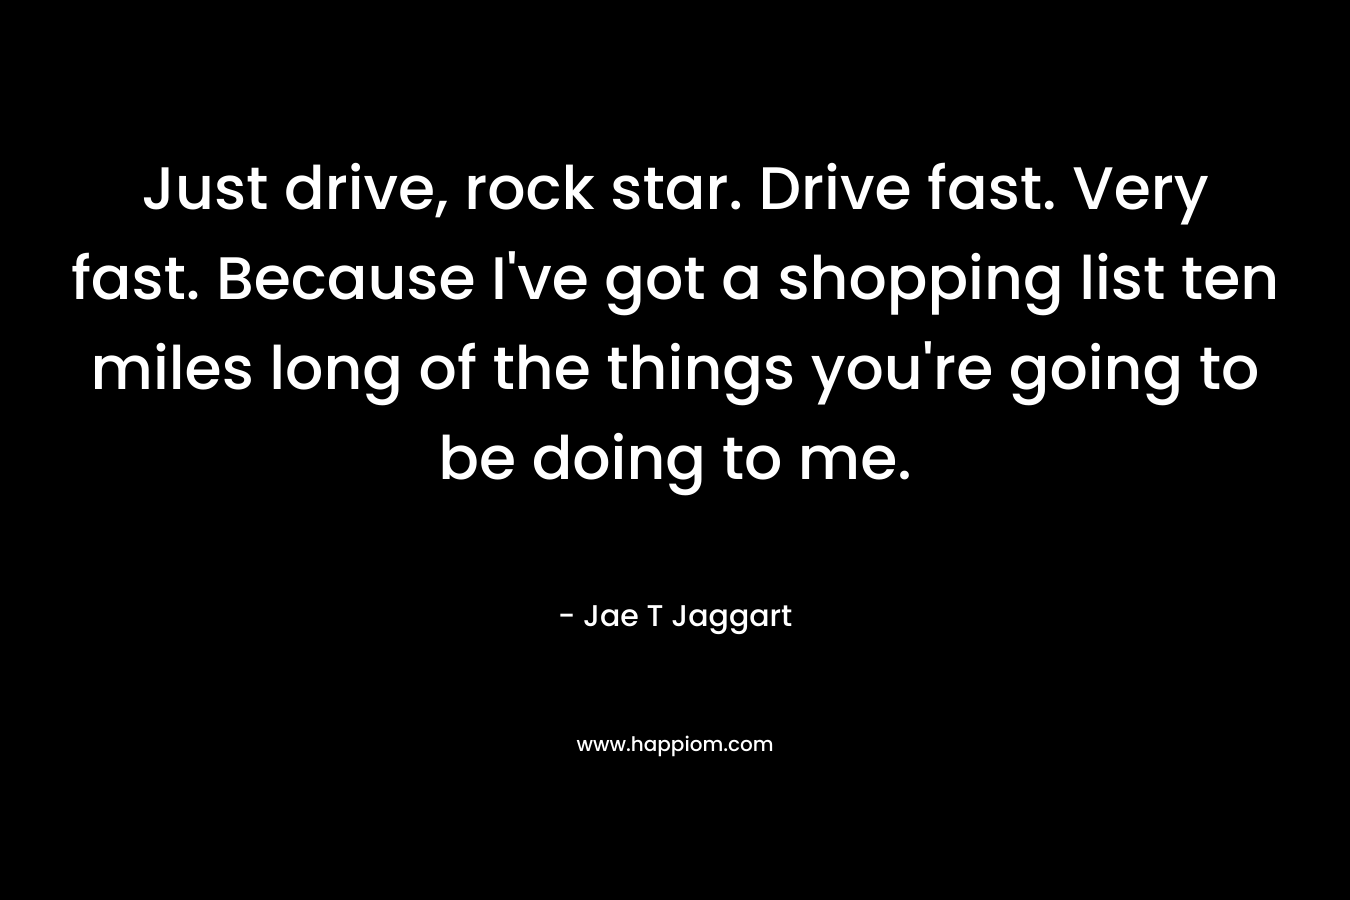 Just drive, rock star. Drive fast. Very fast. Because I’ve got a shopping list ten miles long of the things you’re going to be doing to me. – Jae T Jaggart